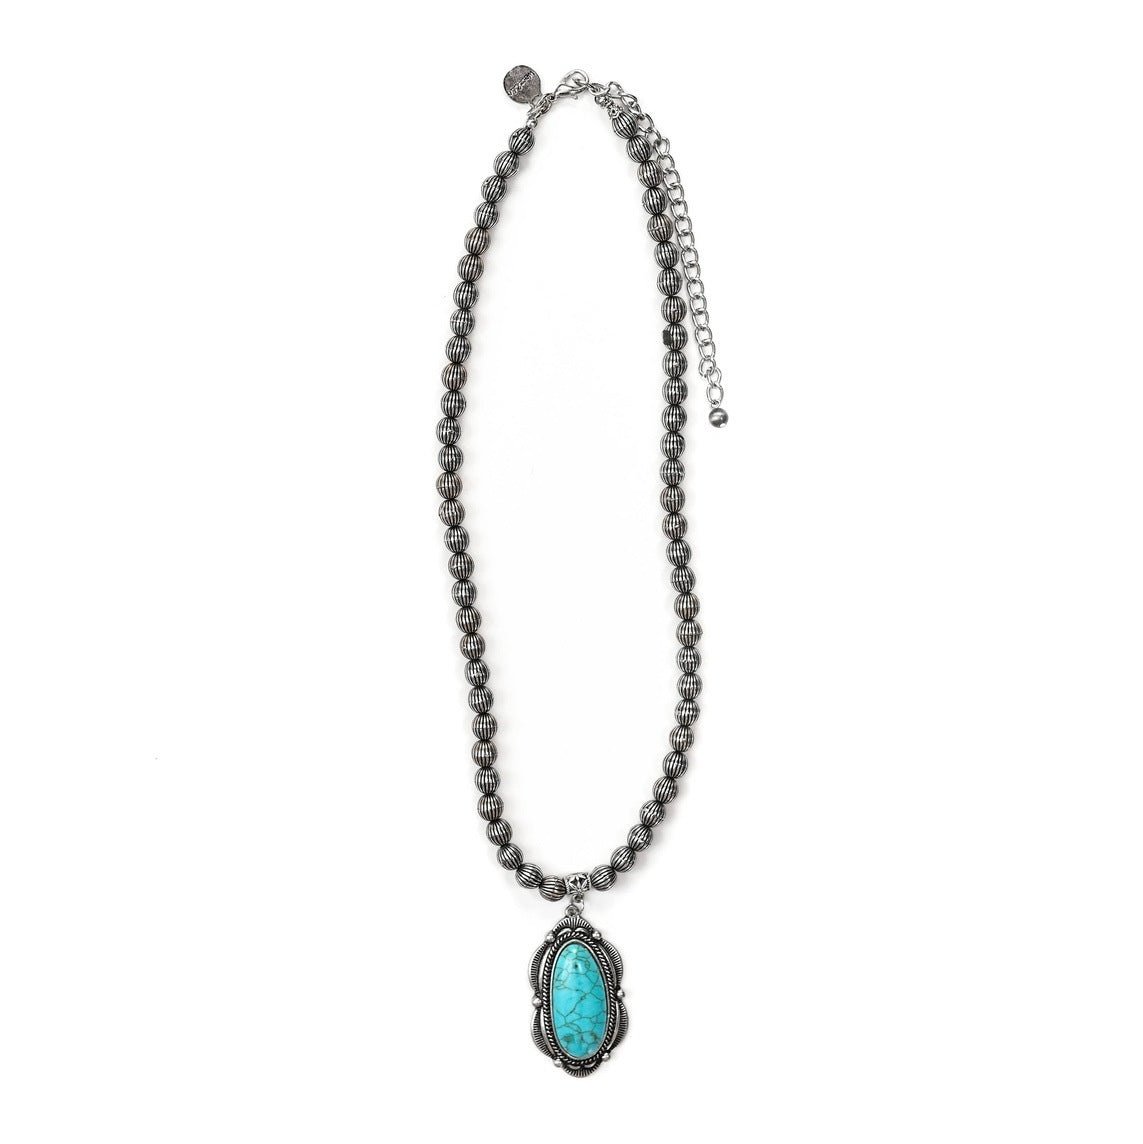 19" Silver Melon Bead Necklace W/ Turquoise Pendant